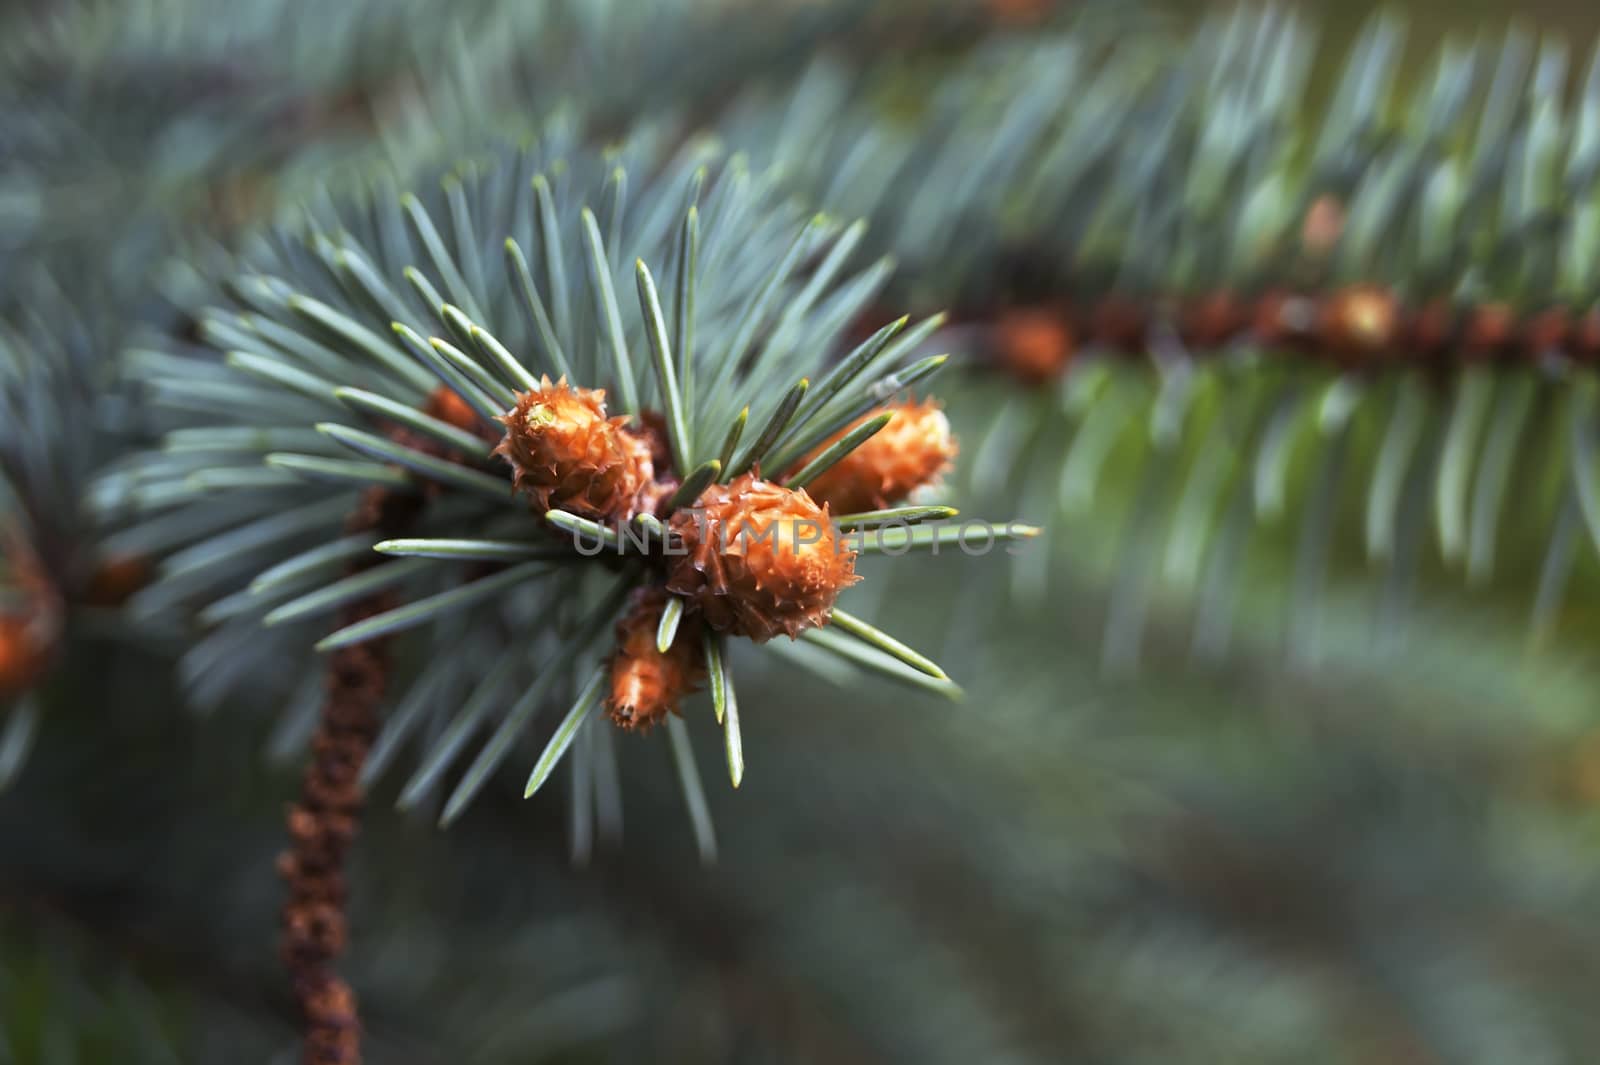 A branch of blue spruce, cones and needles